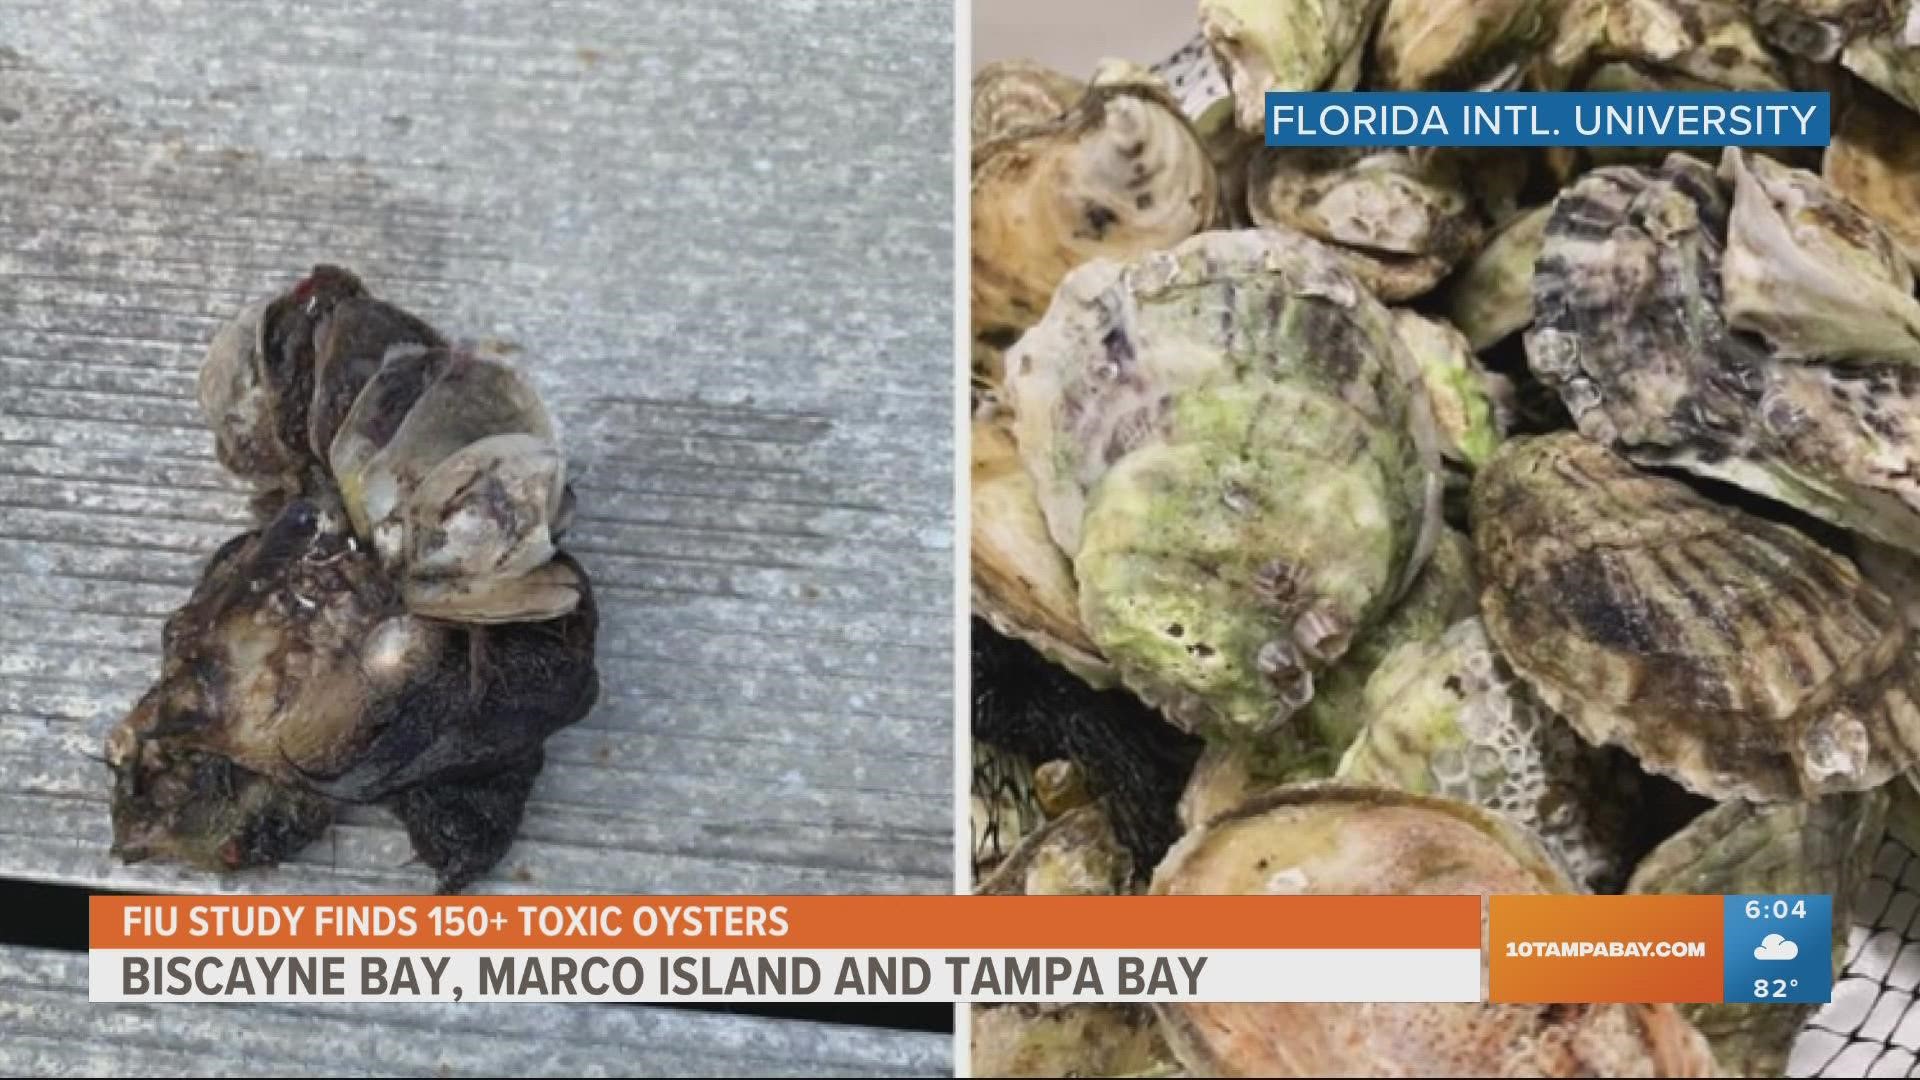 According to FIU, oysters are a great indicator of the health of the ecosystem because they are filter-feeders.